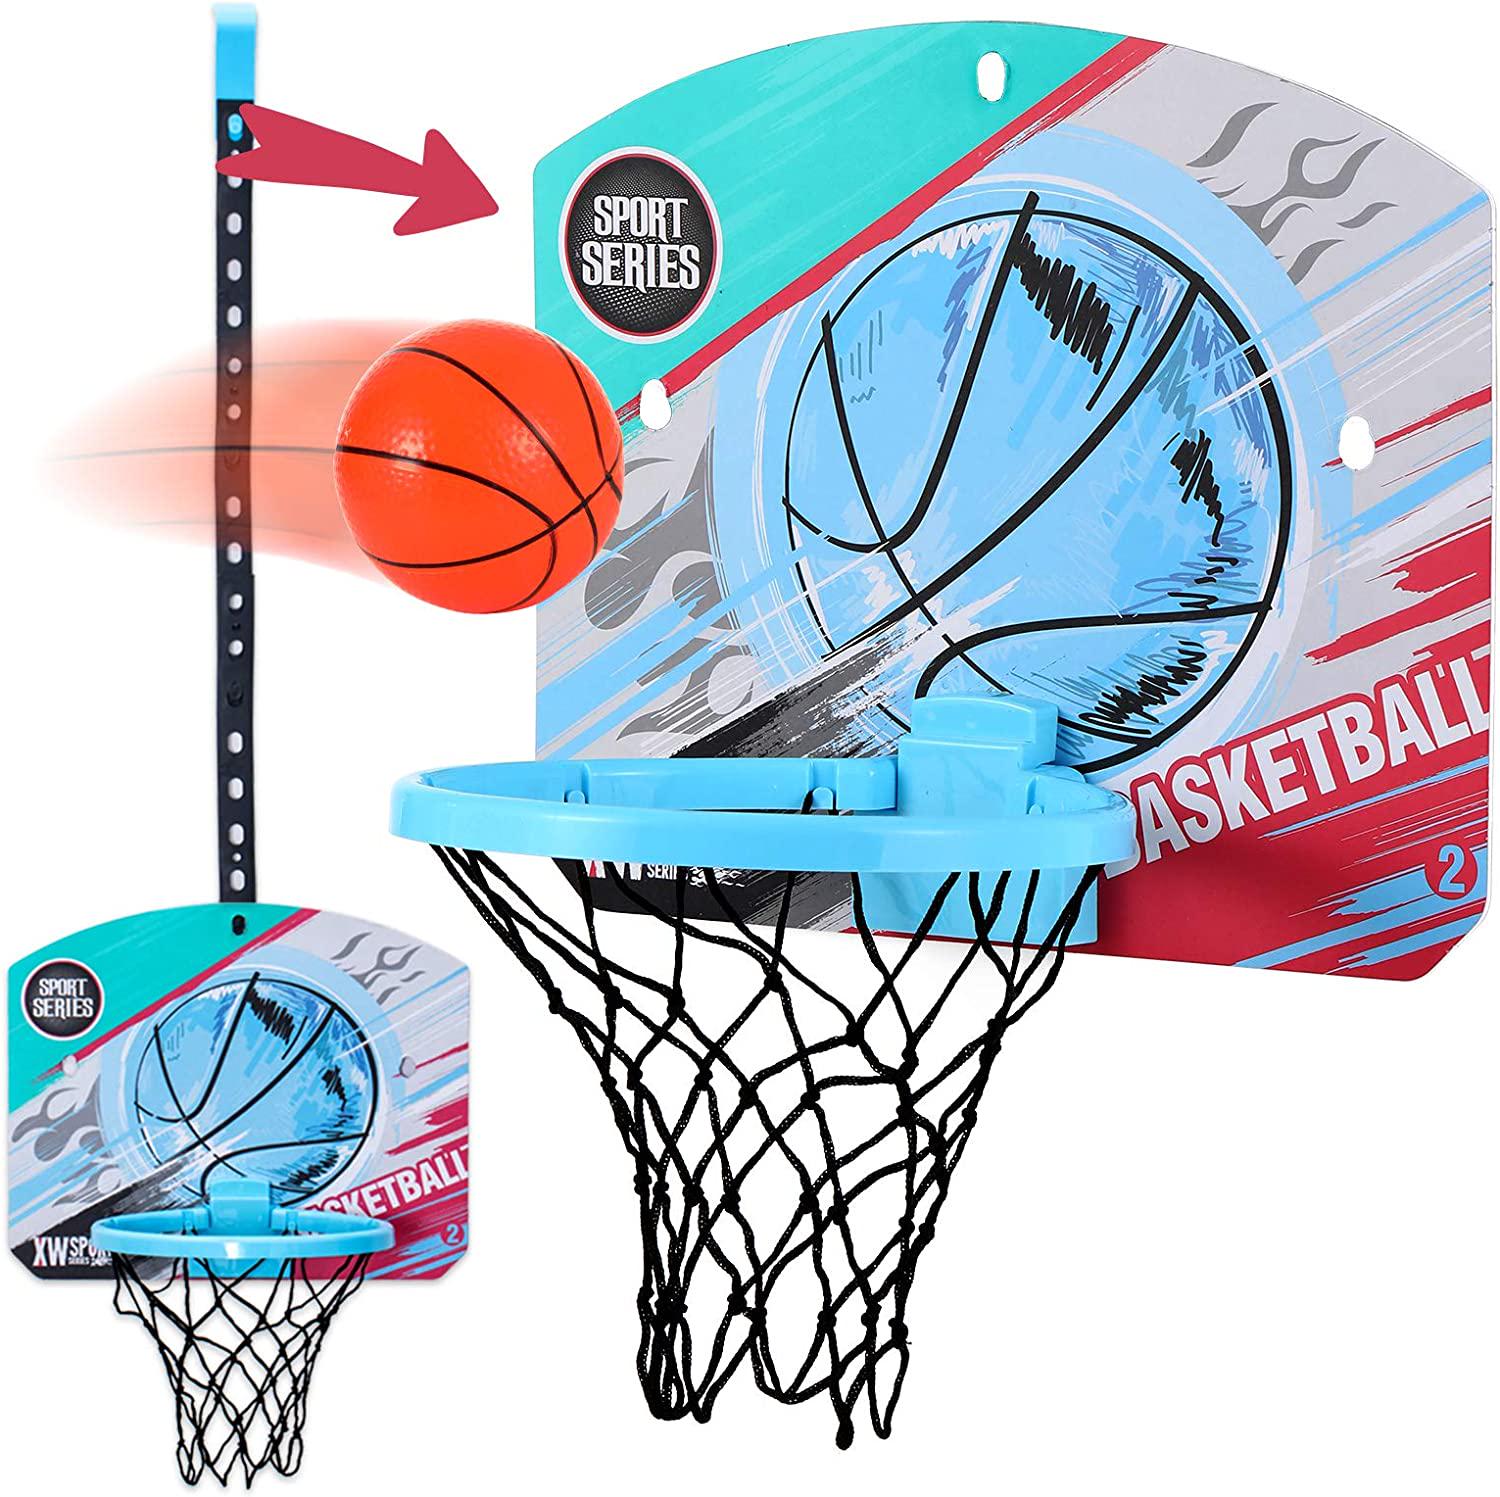 Tirafal, Mini Basketball Hoop Indoor for Kids,Over the Door Basketball Hoop for Room,Office&Bathroom Games,Desk Accessories for Cubicle,Shooting Game Toy for Kids&Adults,Gift for Boys Girls Toddlers,Punch-Free